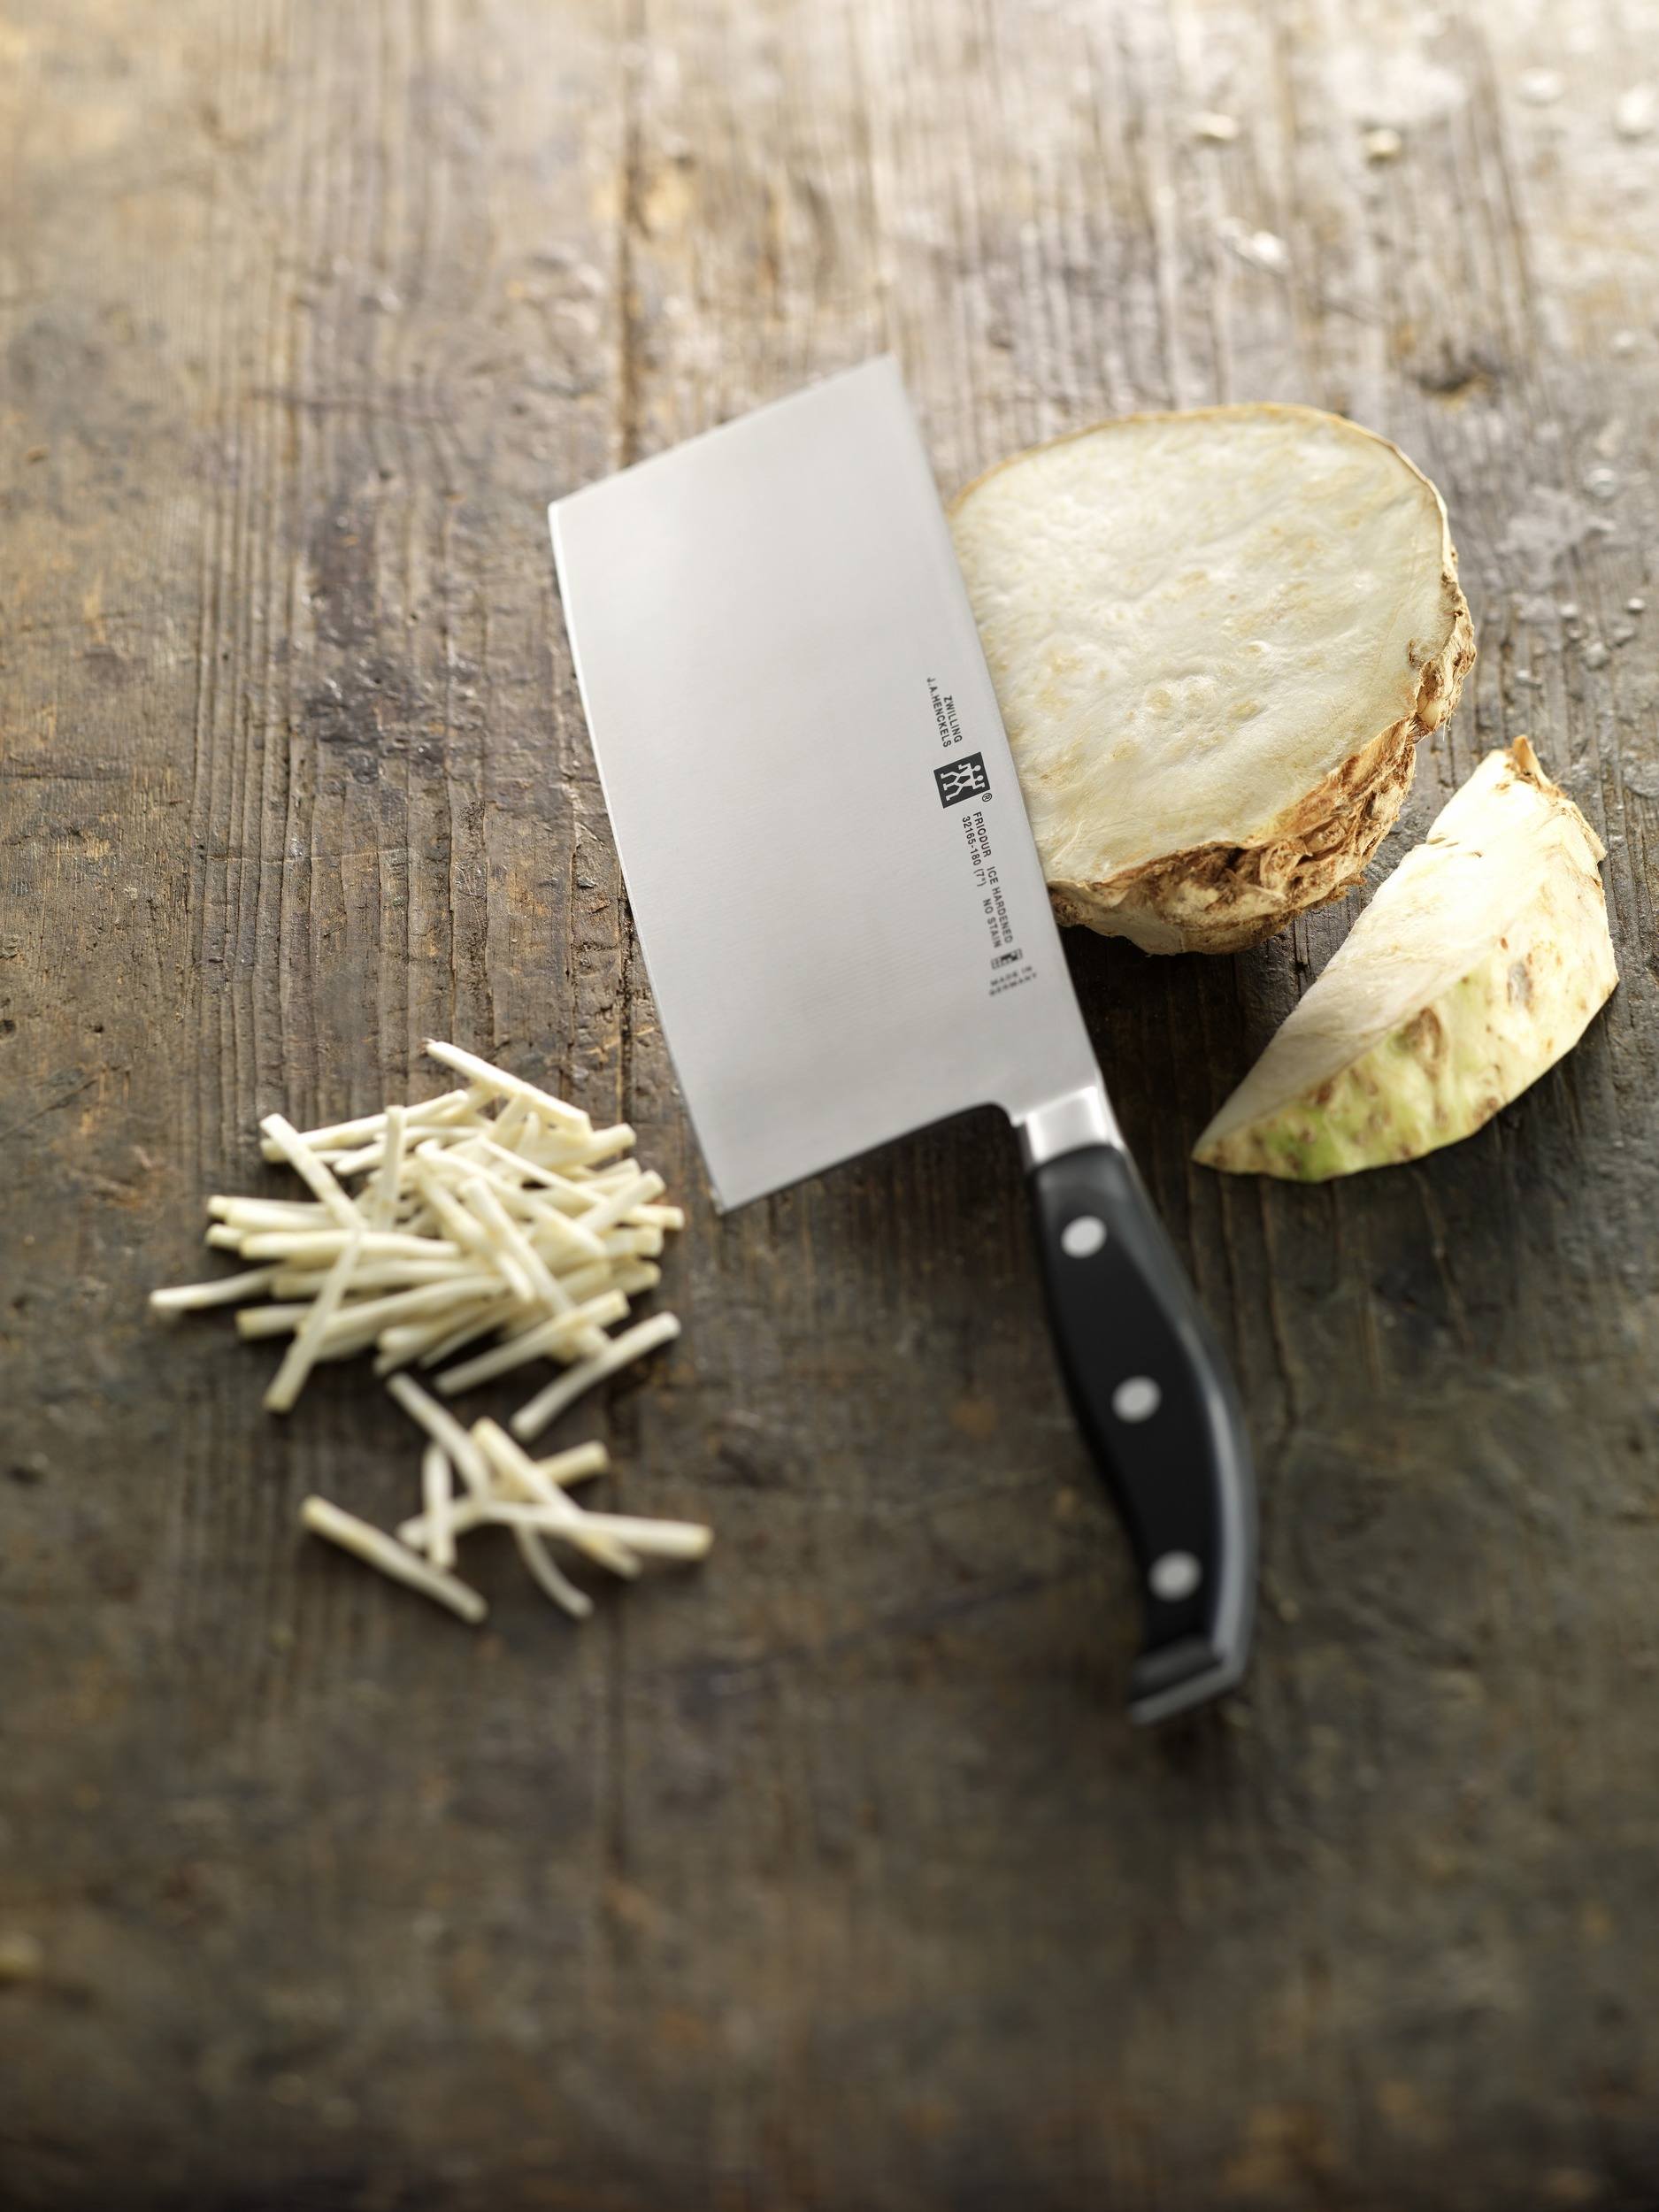 https://3fa-media.com/zwilling/zwilling-zwilling-pro-chinese-cleaver-18-cm__107770_bc69749-s2500x2500.jpg